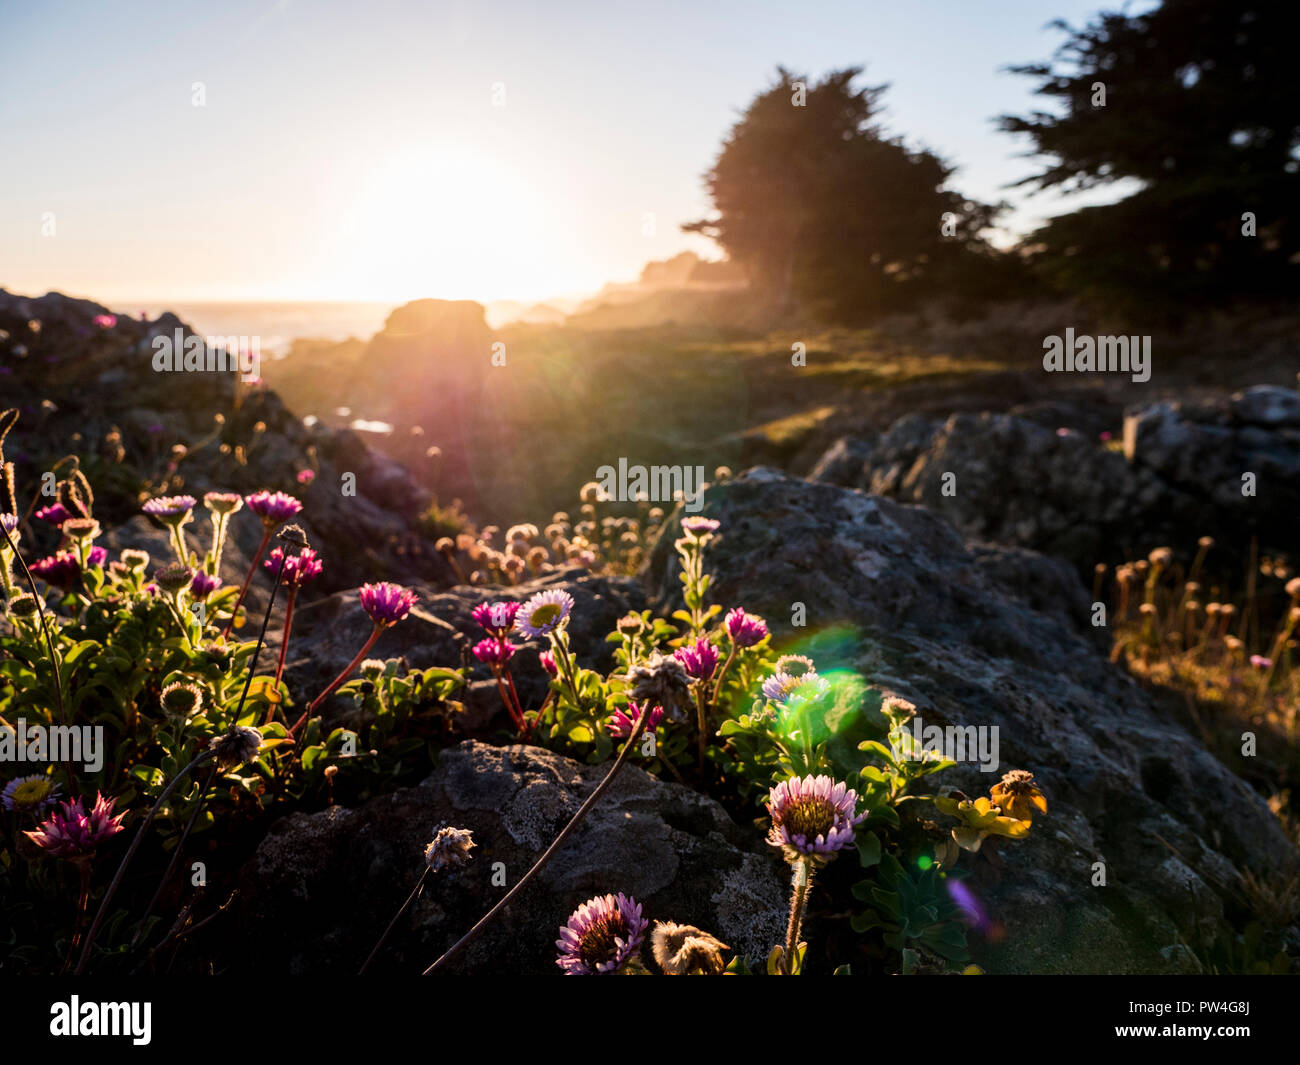 Flowers growing on rocks against sky during sunset Stock Photo